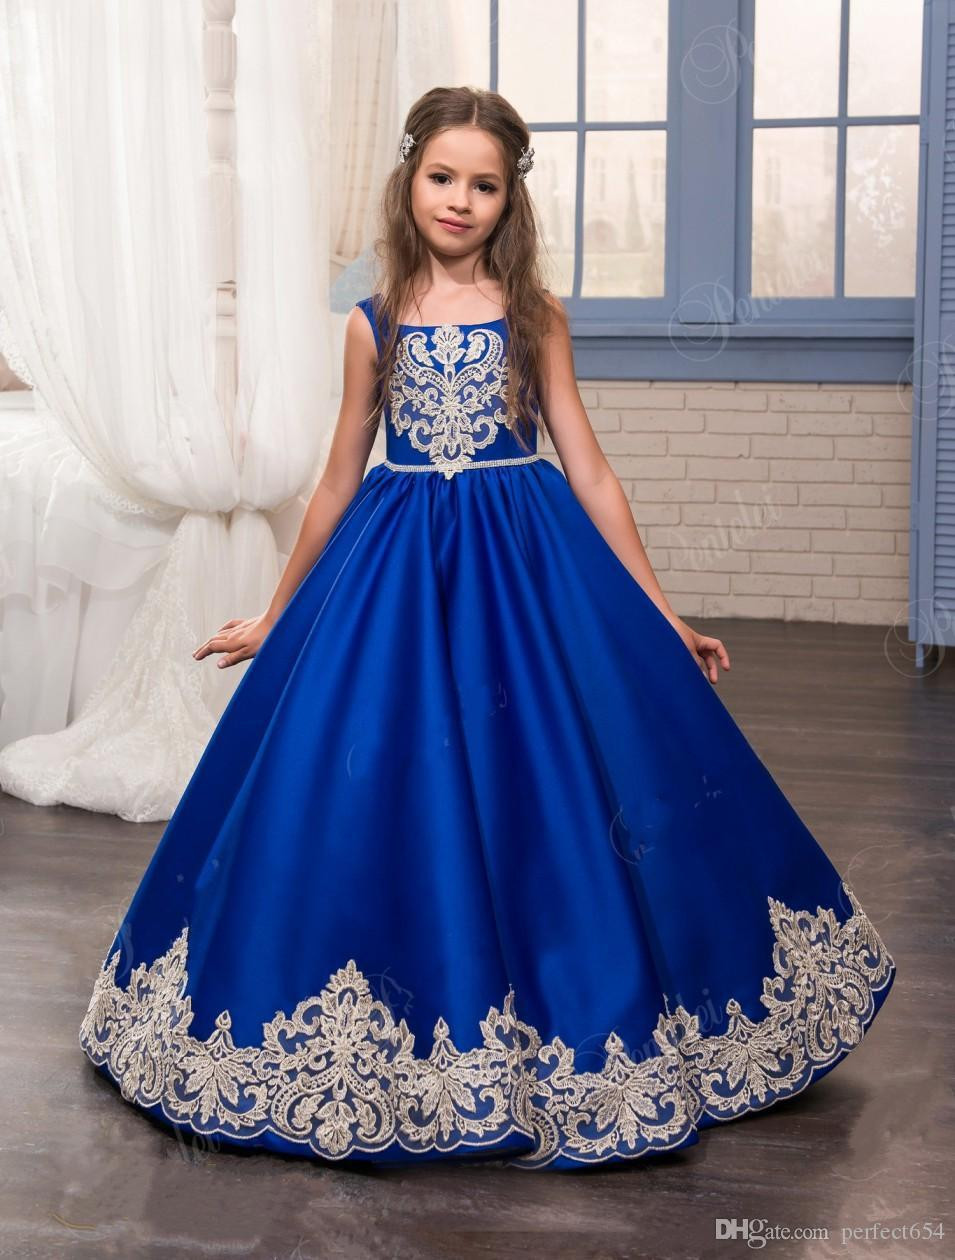 Party Dress For Kids
 Kids Christmas Dresses For Party 2017 Royal Blue Girl